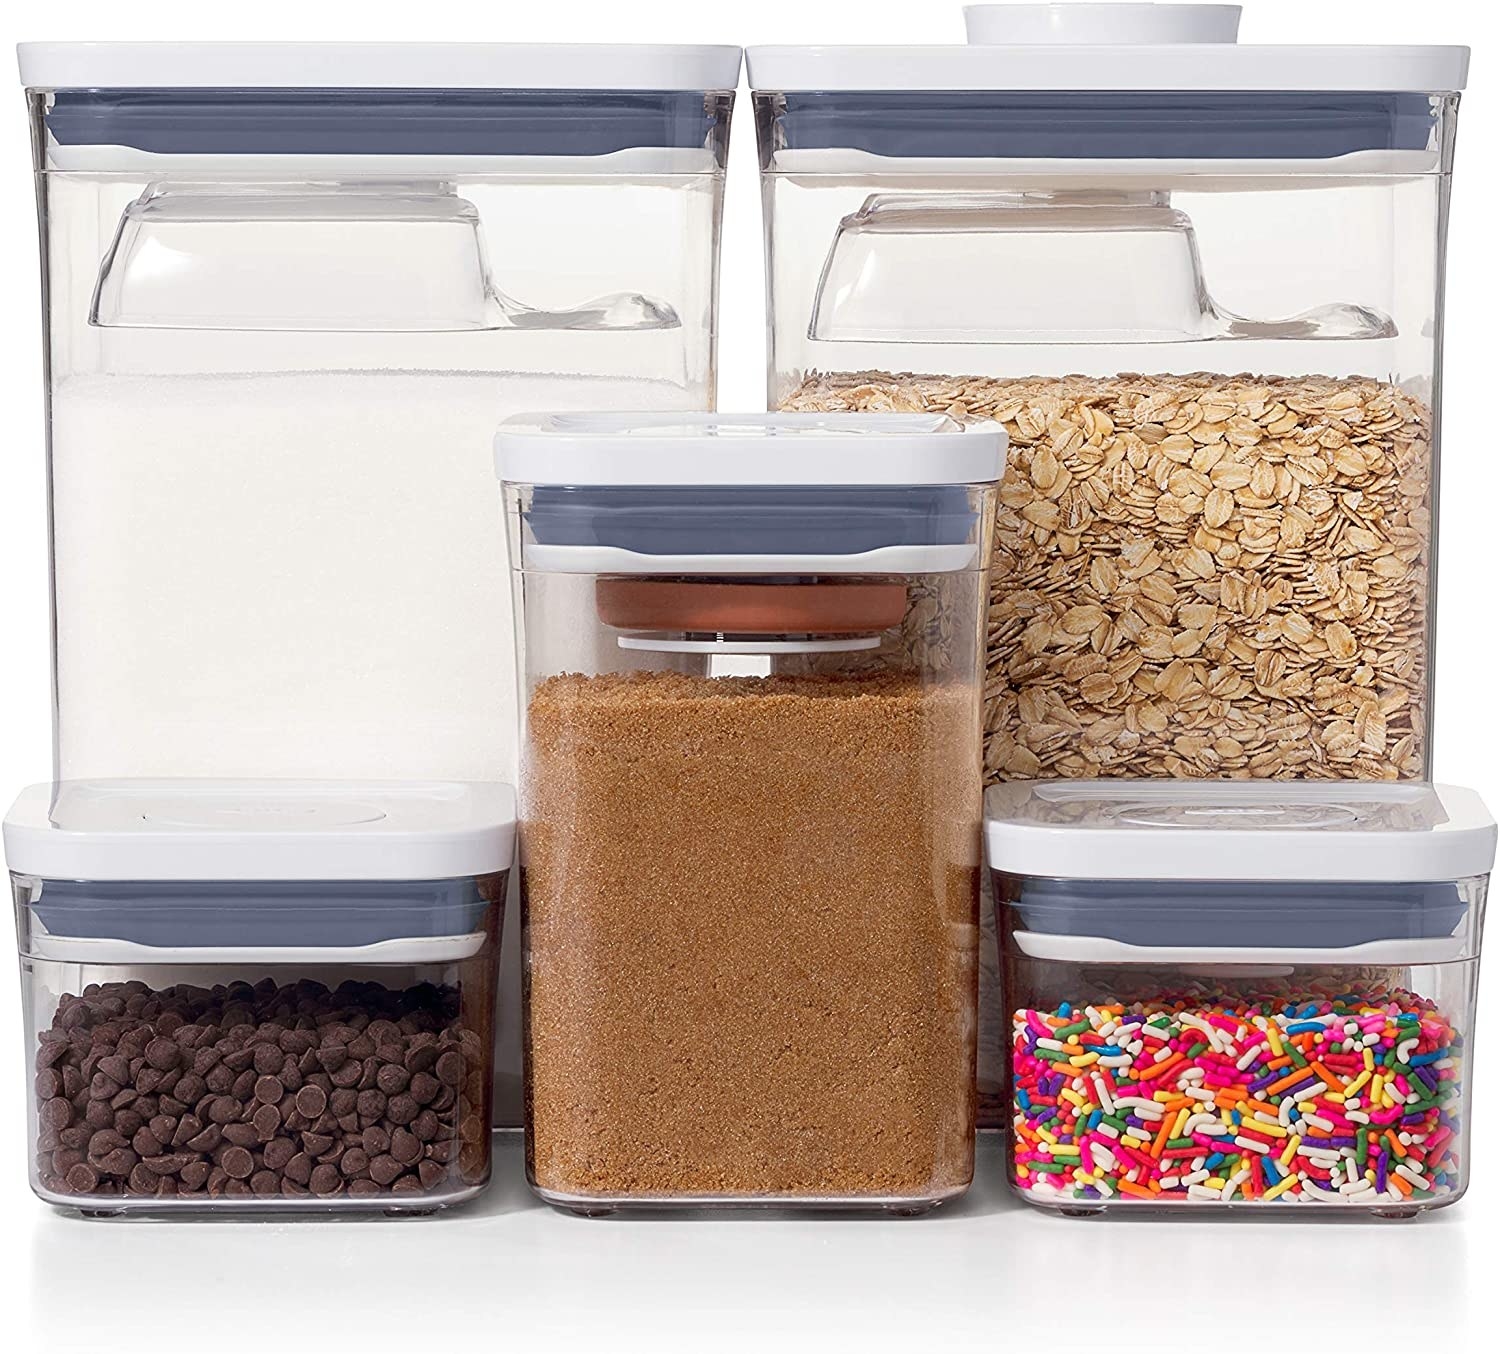 the eight piece set of clear containers with white lids